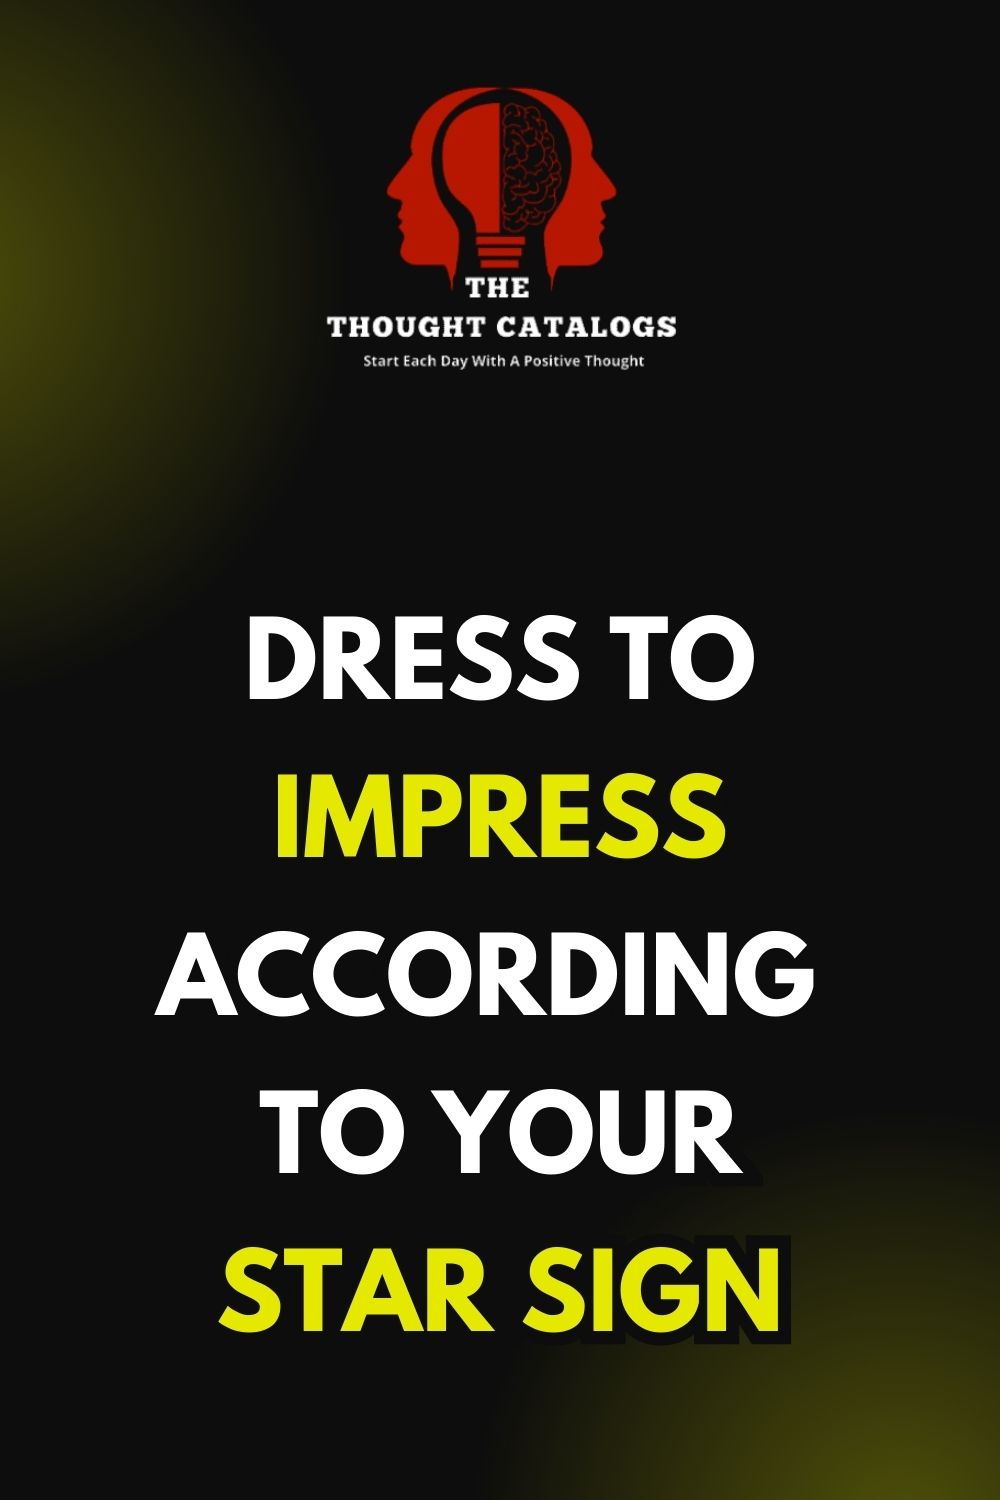 Dress to Impress According to Your Star Sign